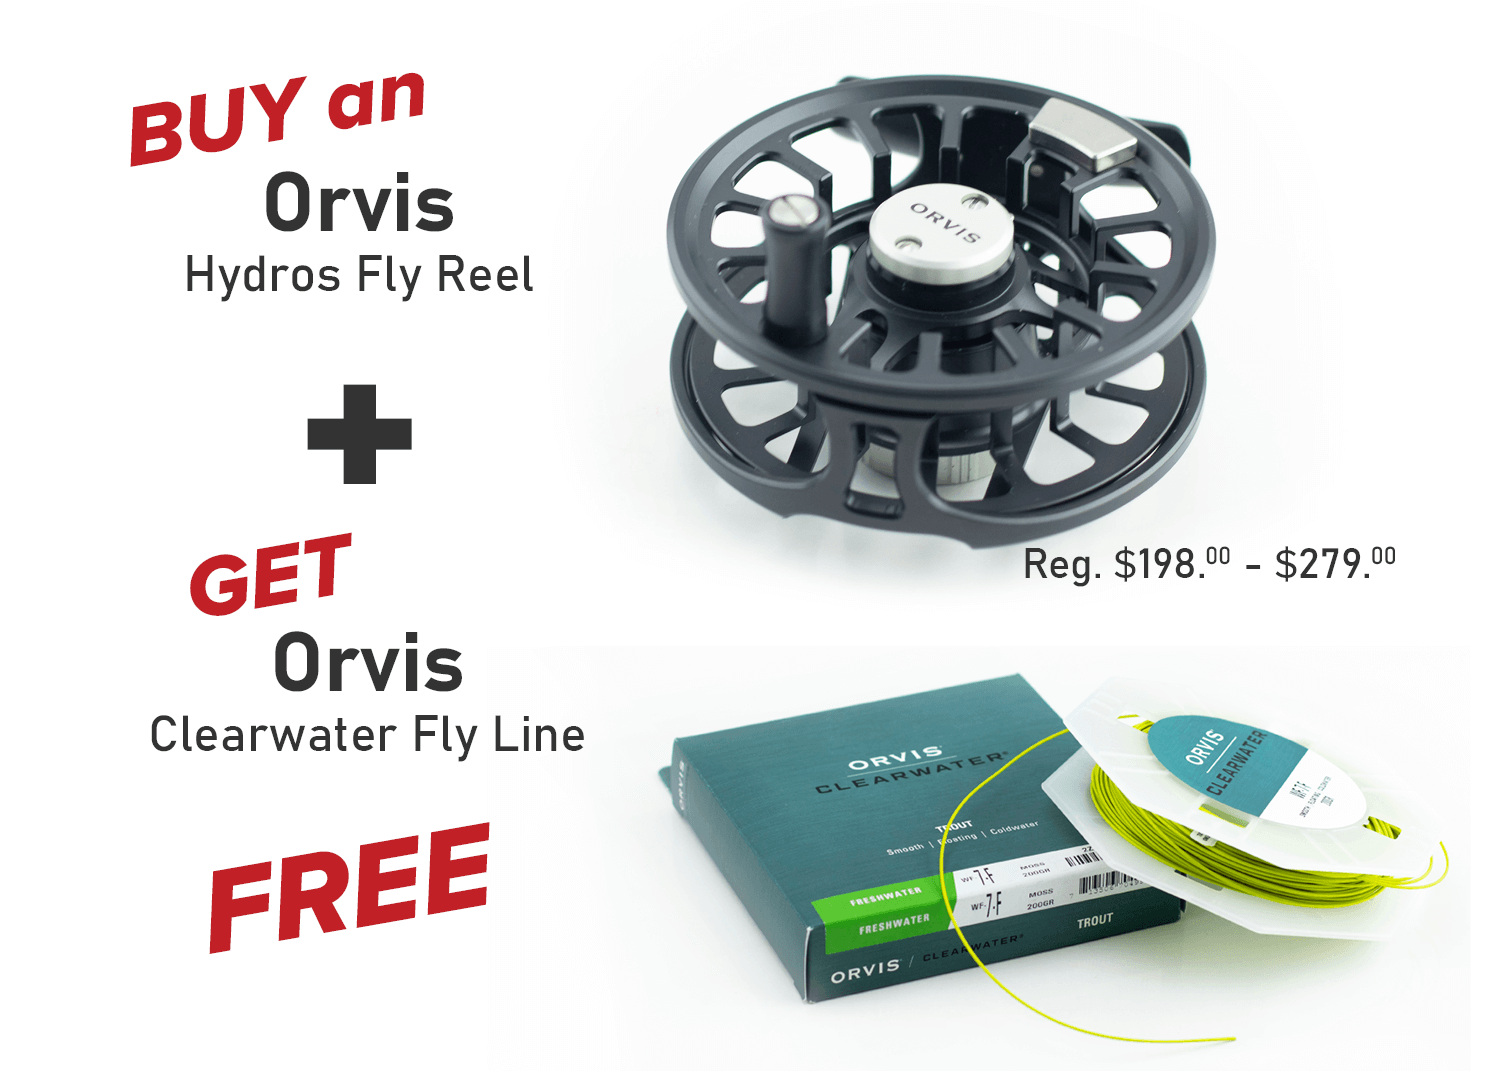 Buy an Orvis Hydros Fly Reel & Get a FREE Orvis Clearwater Fly Line